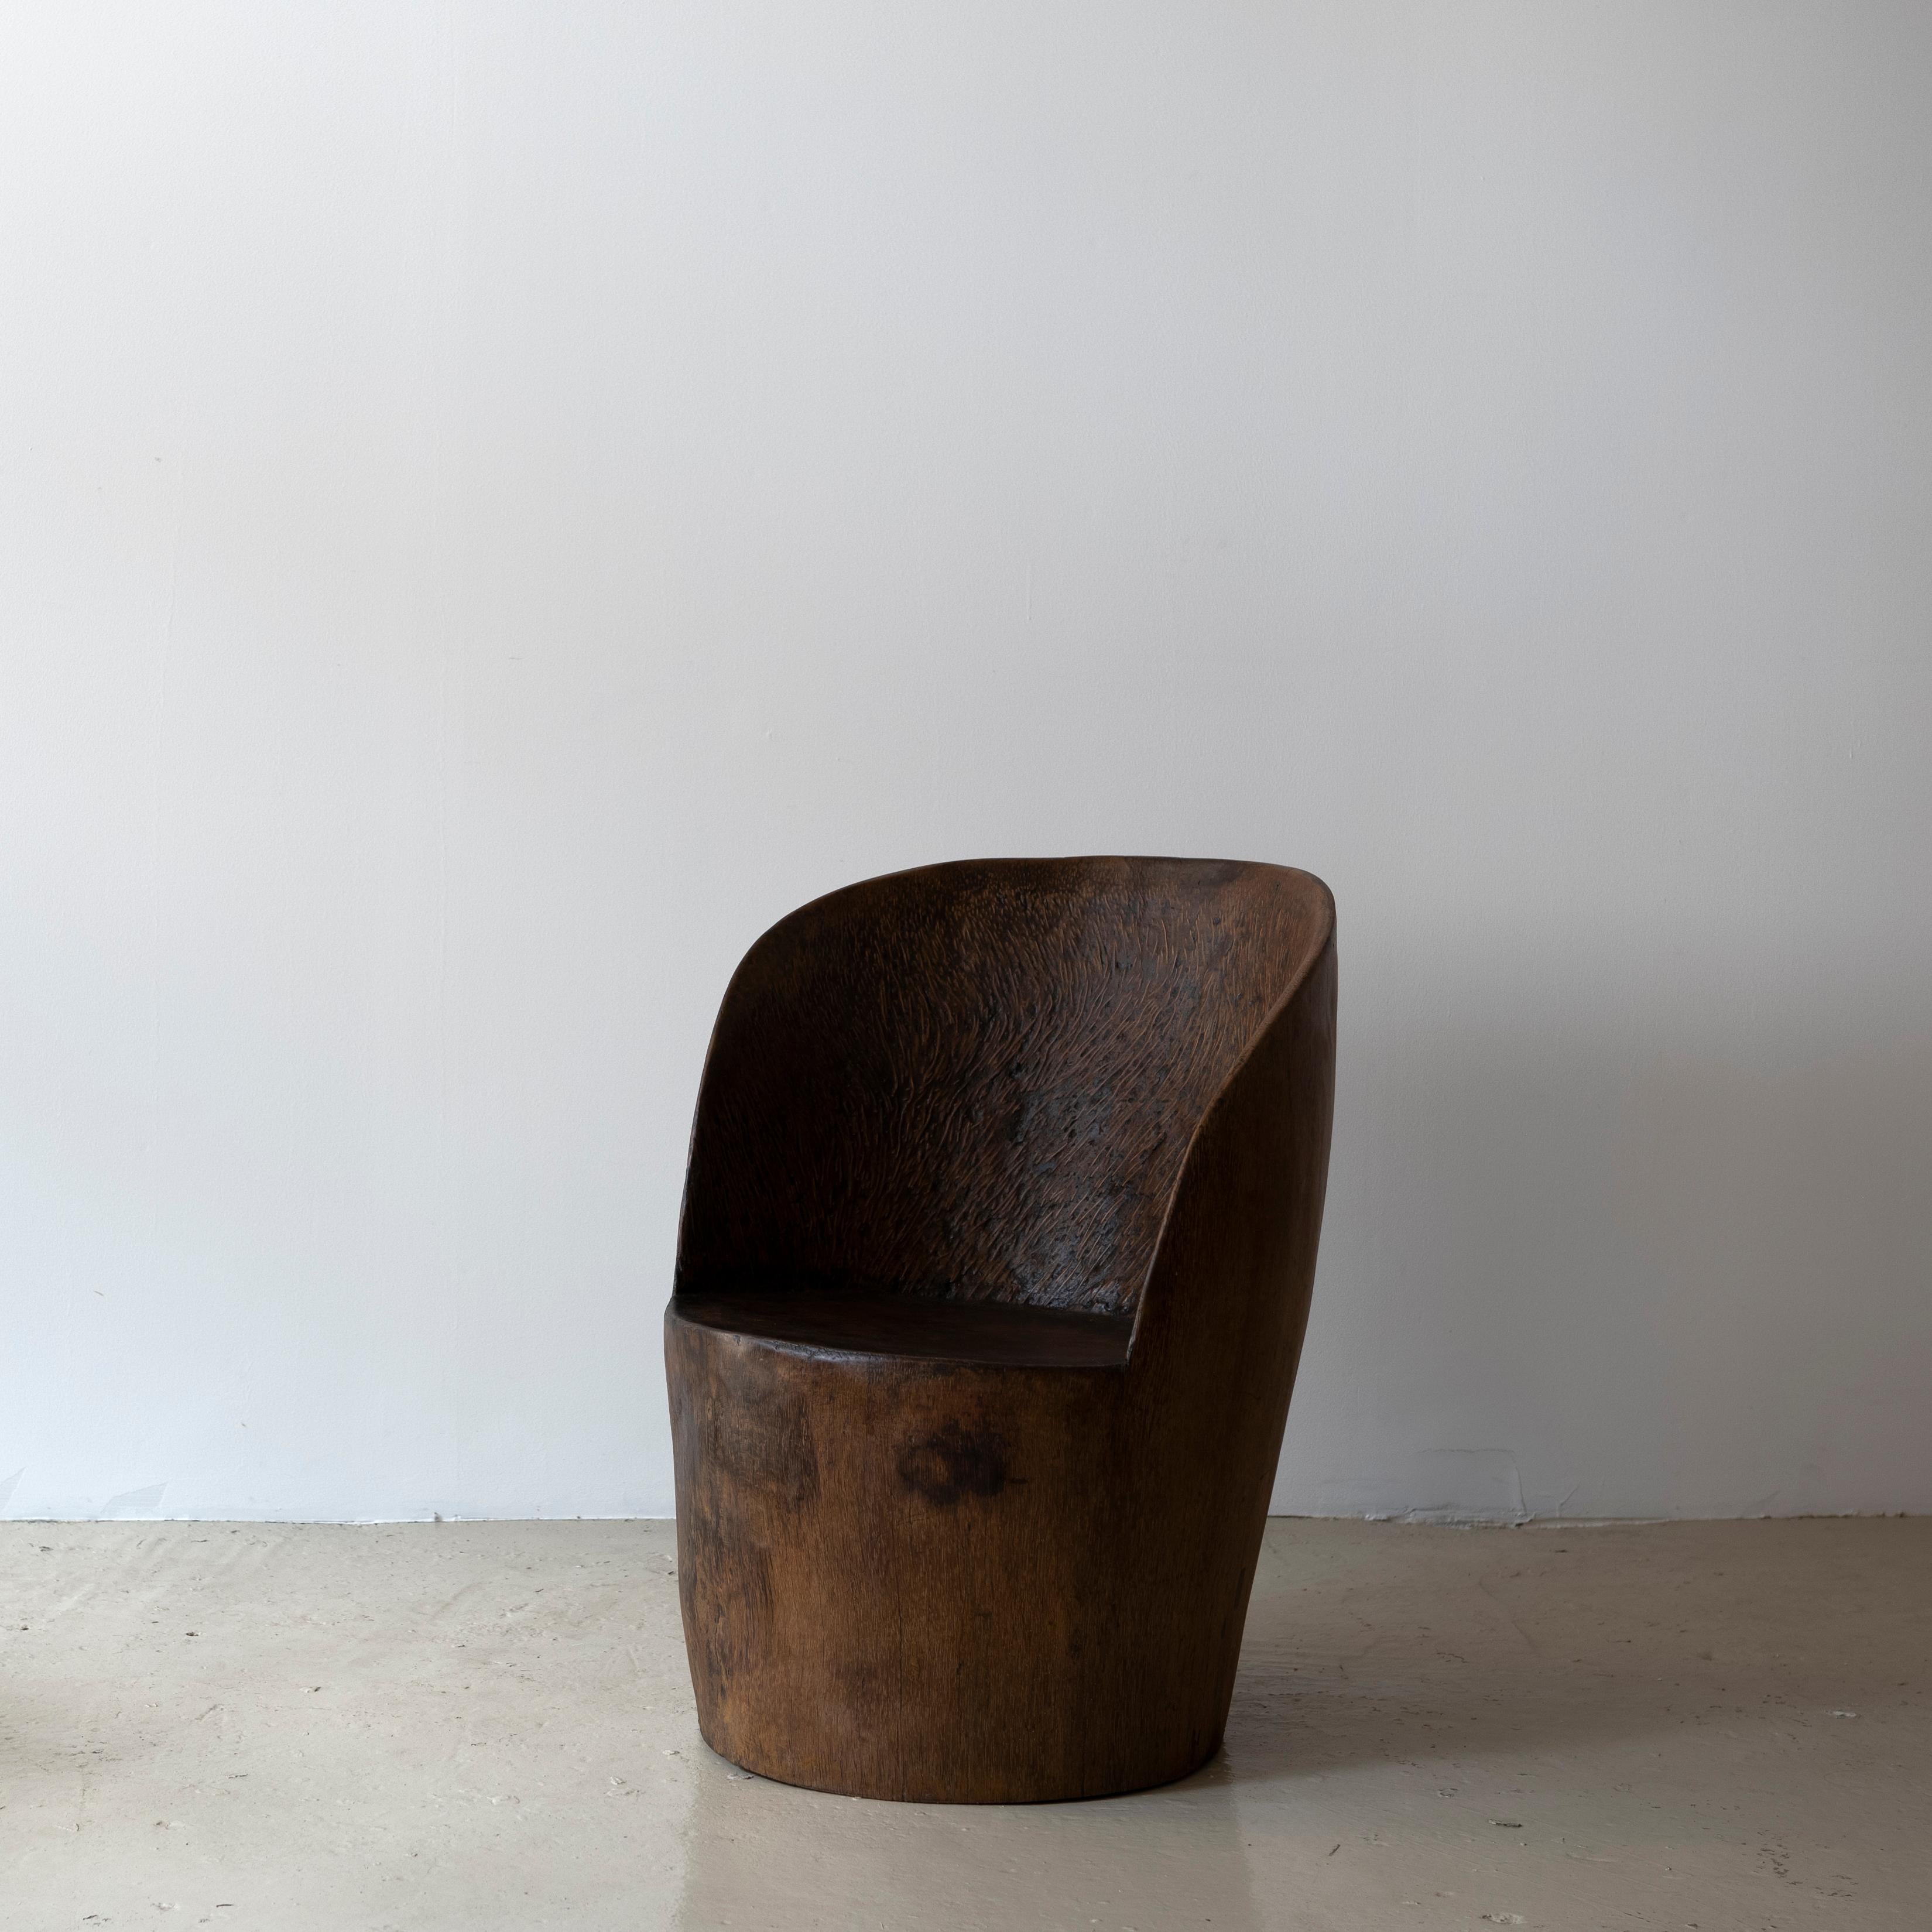 Hand-sculpted chair by José Zanine Caldas, Circa 1970s.

This chair was made of Brazilian hard wood. Signed 